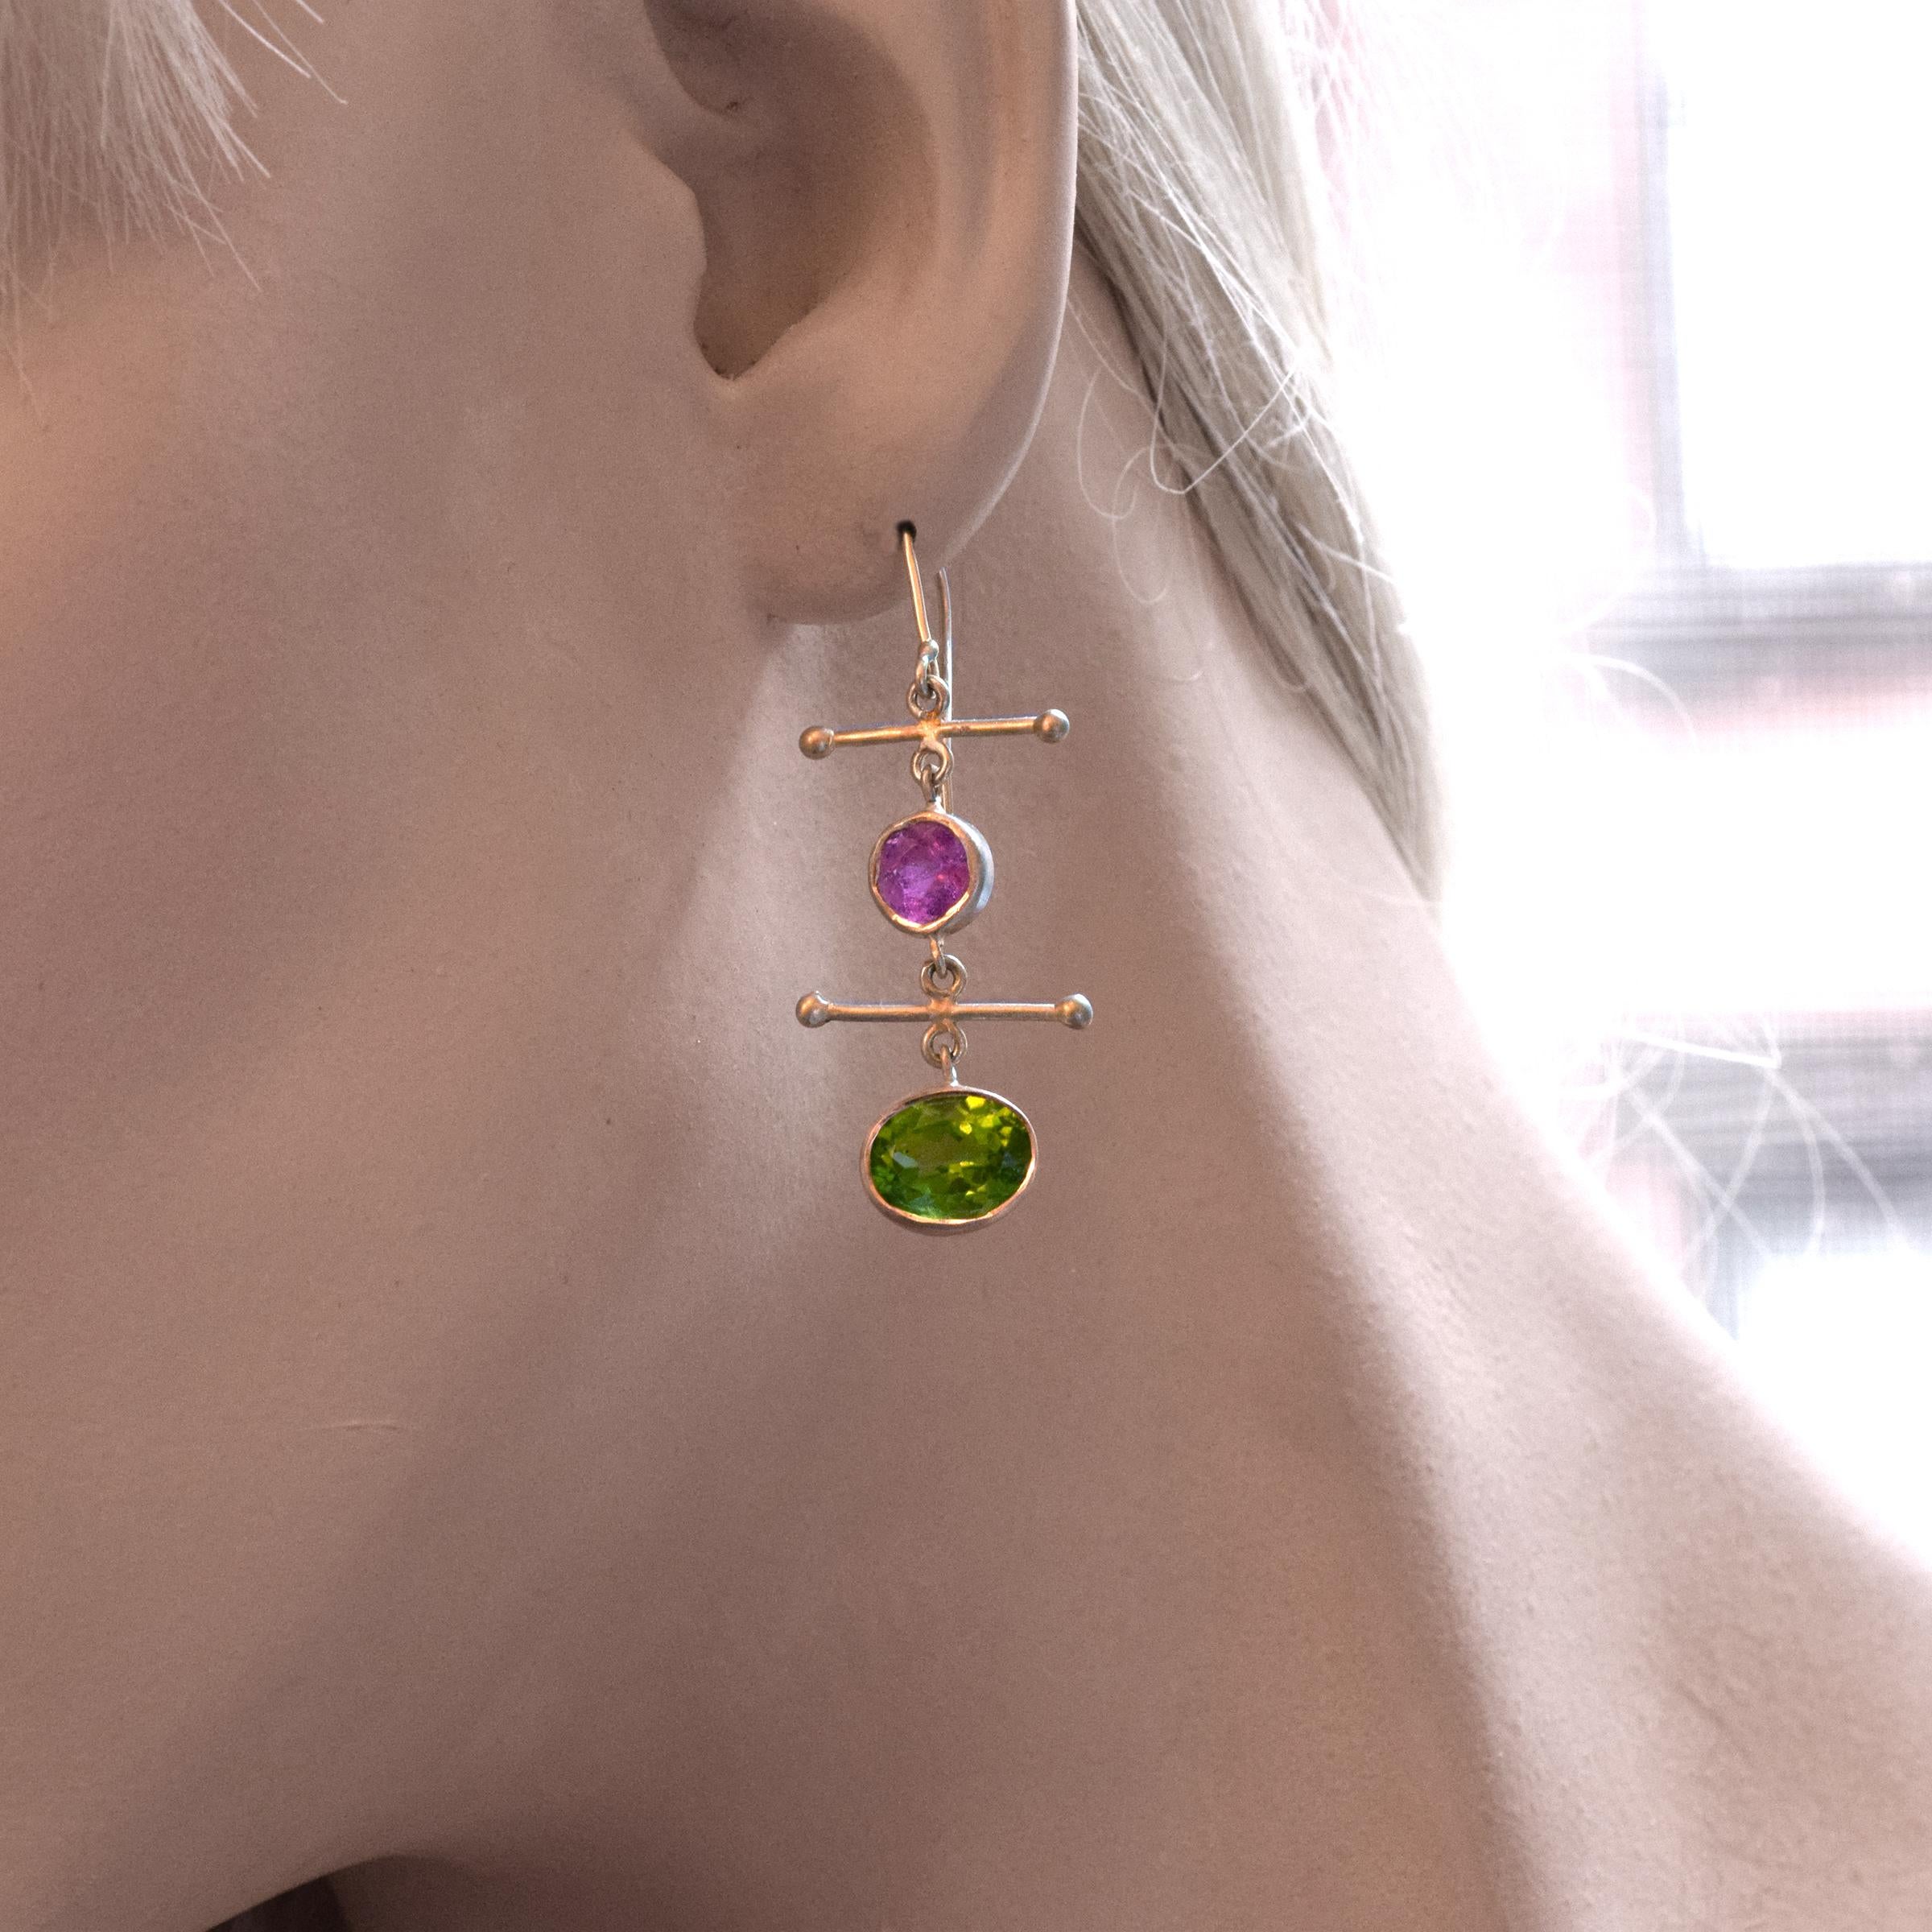 These one of a kind earrings feature 5.49 carats of faceted oval peridots and 2.135 carats of faceted pink tourmaline rounds all suspended from my 18K Gold Crossbars, inspired by Victorian watch fobs --  Hand-fabricated in my Soho, NYC studio.
All